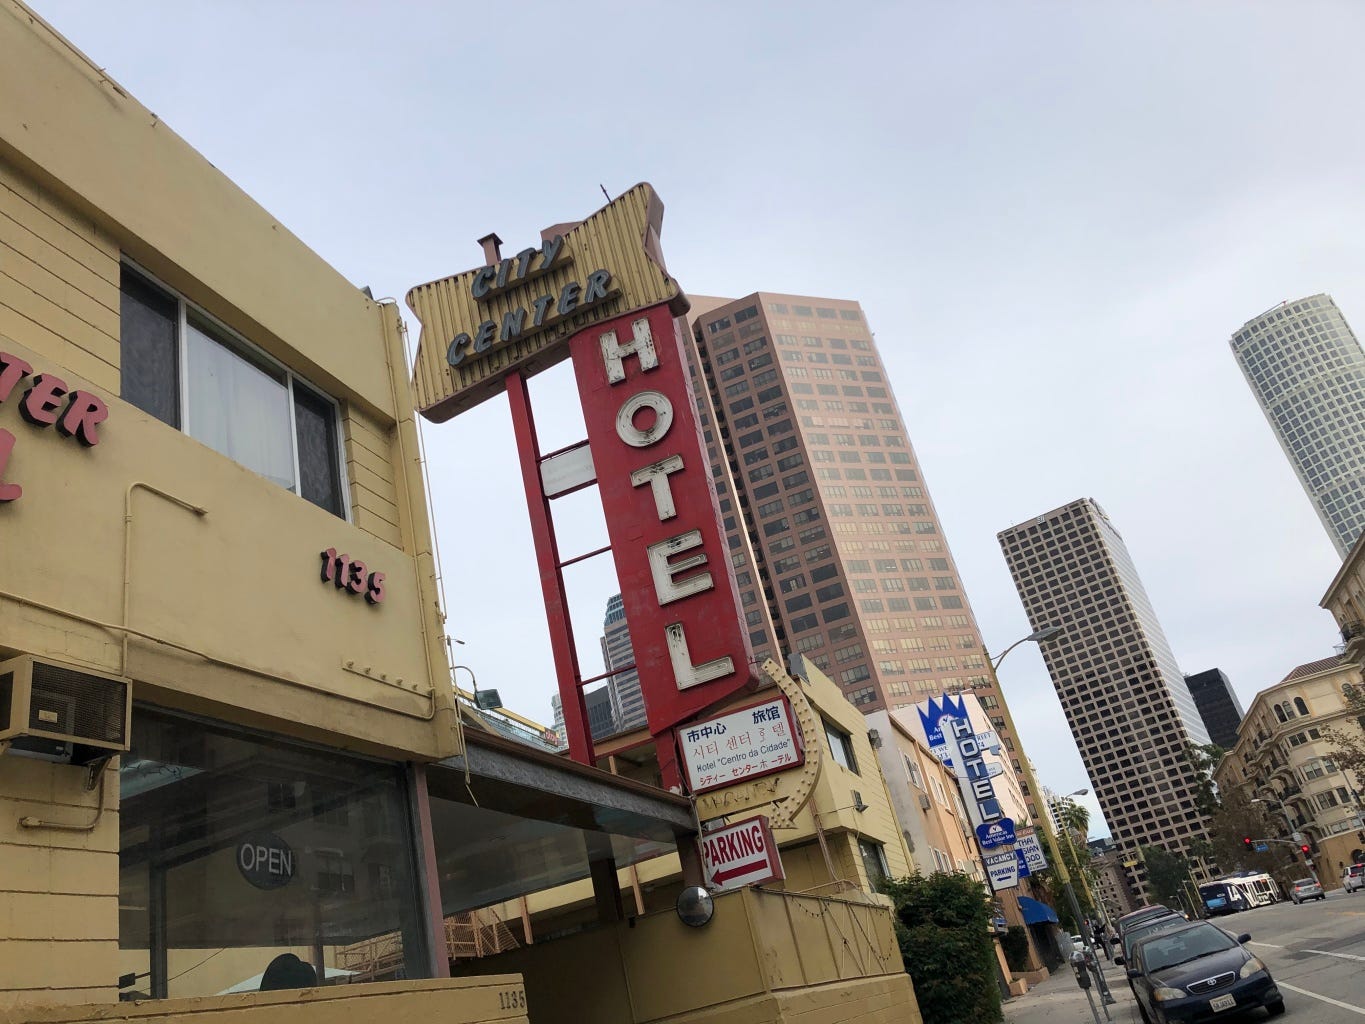 A picture of a vintage hotel sign in Downtown Los Angeles, with skyscrapers in the background.